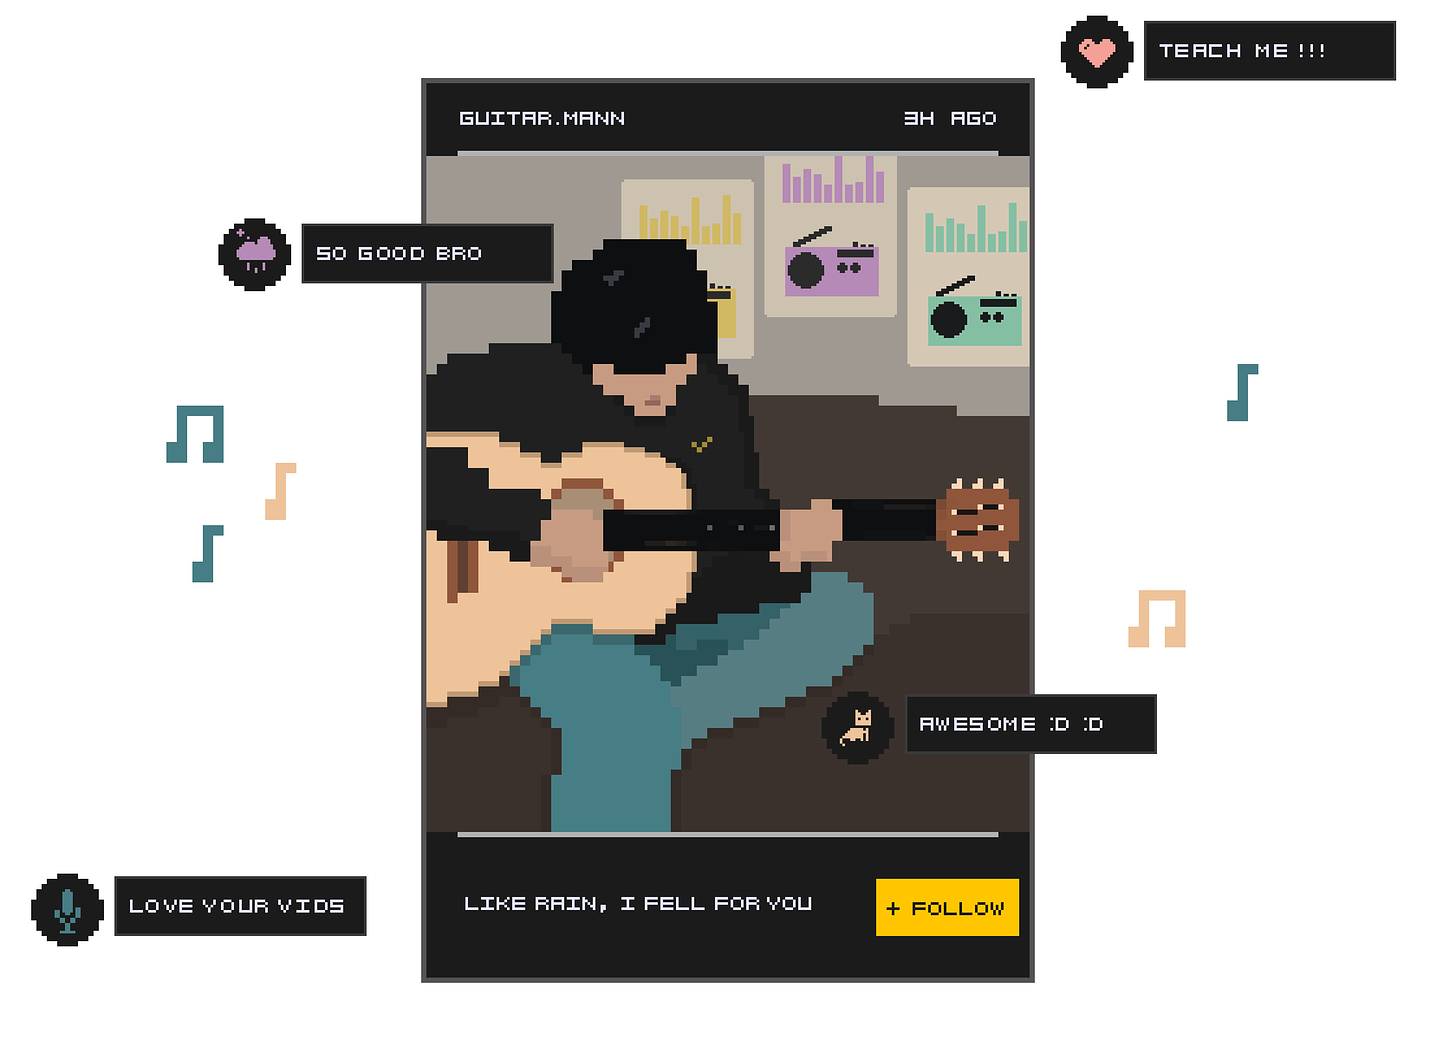 Commissioned pixel art image of a phone screen with a still of a man playing guitar on his couch, posted on a video sharing platform. There are positive comments and music notes floating around the screen.